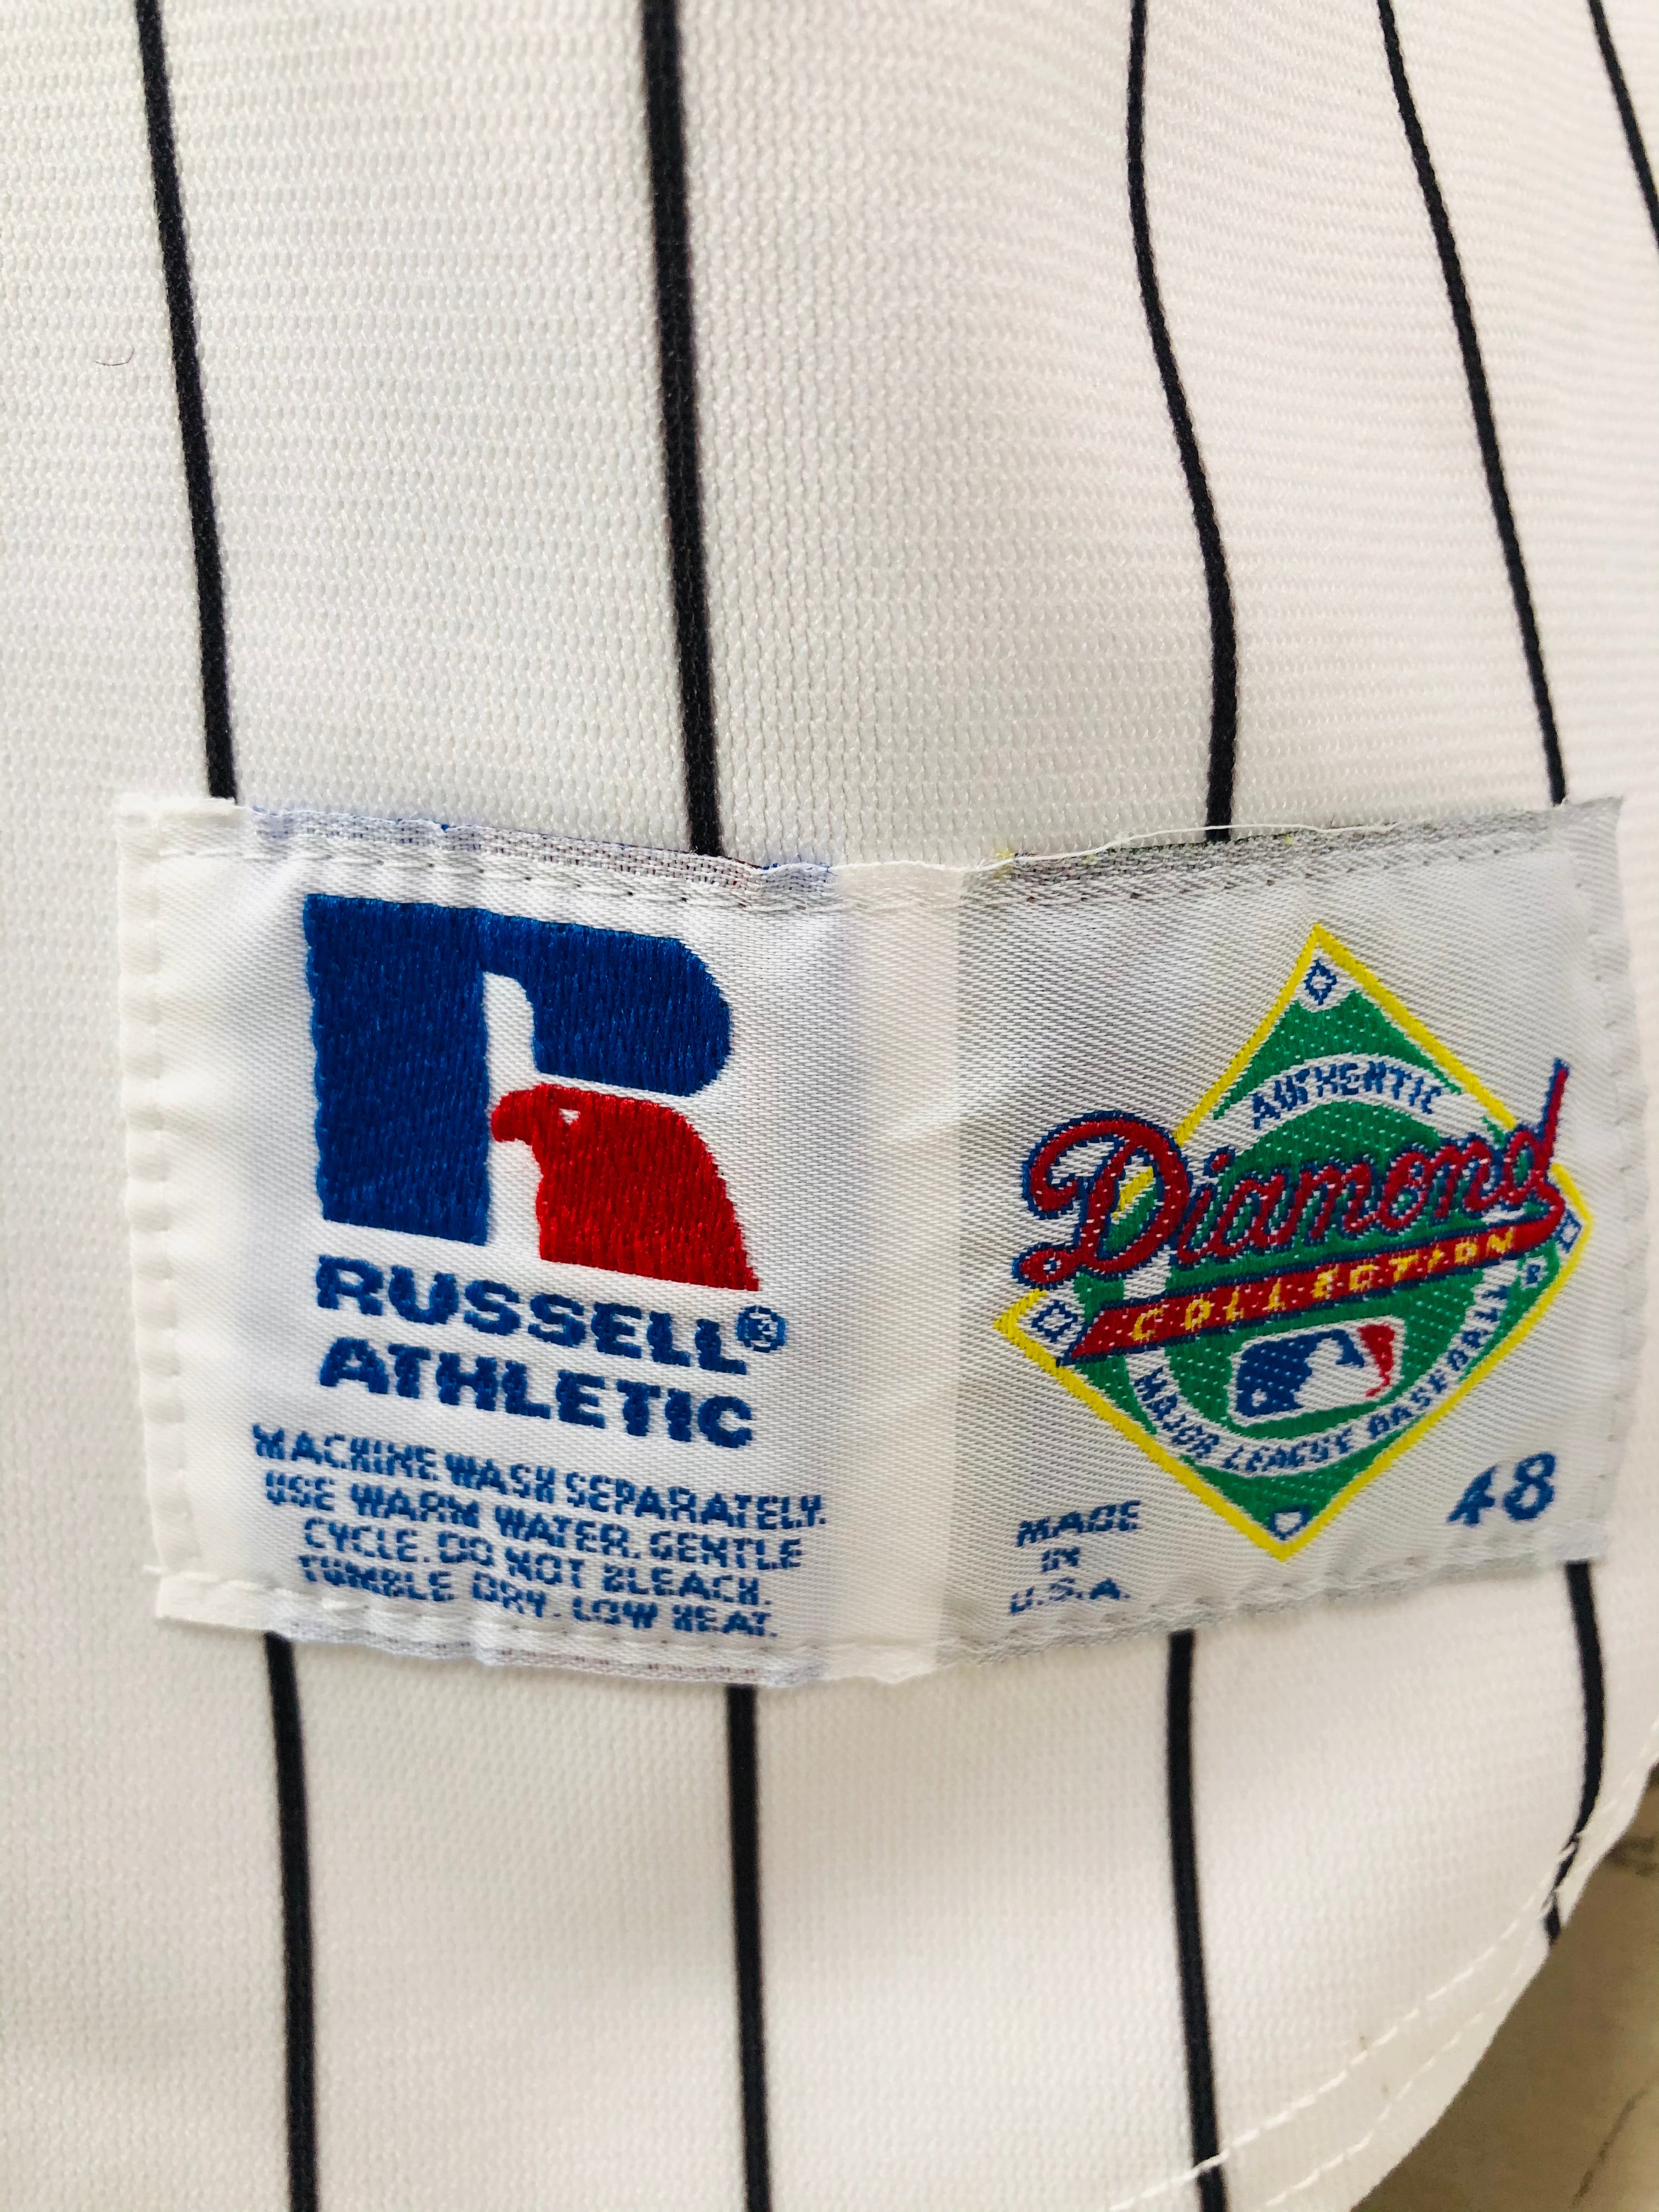 New York Yankees 1998 World Series Russell Athletic Jersey Size 44 Away  Jersey